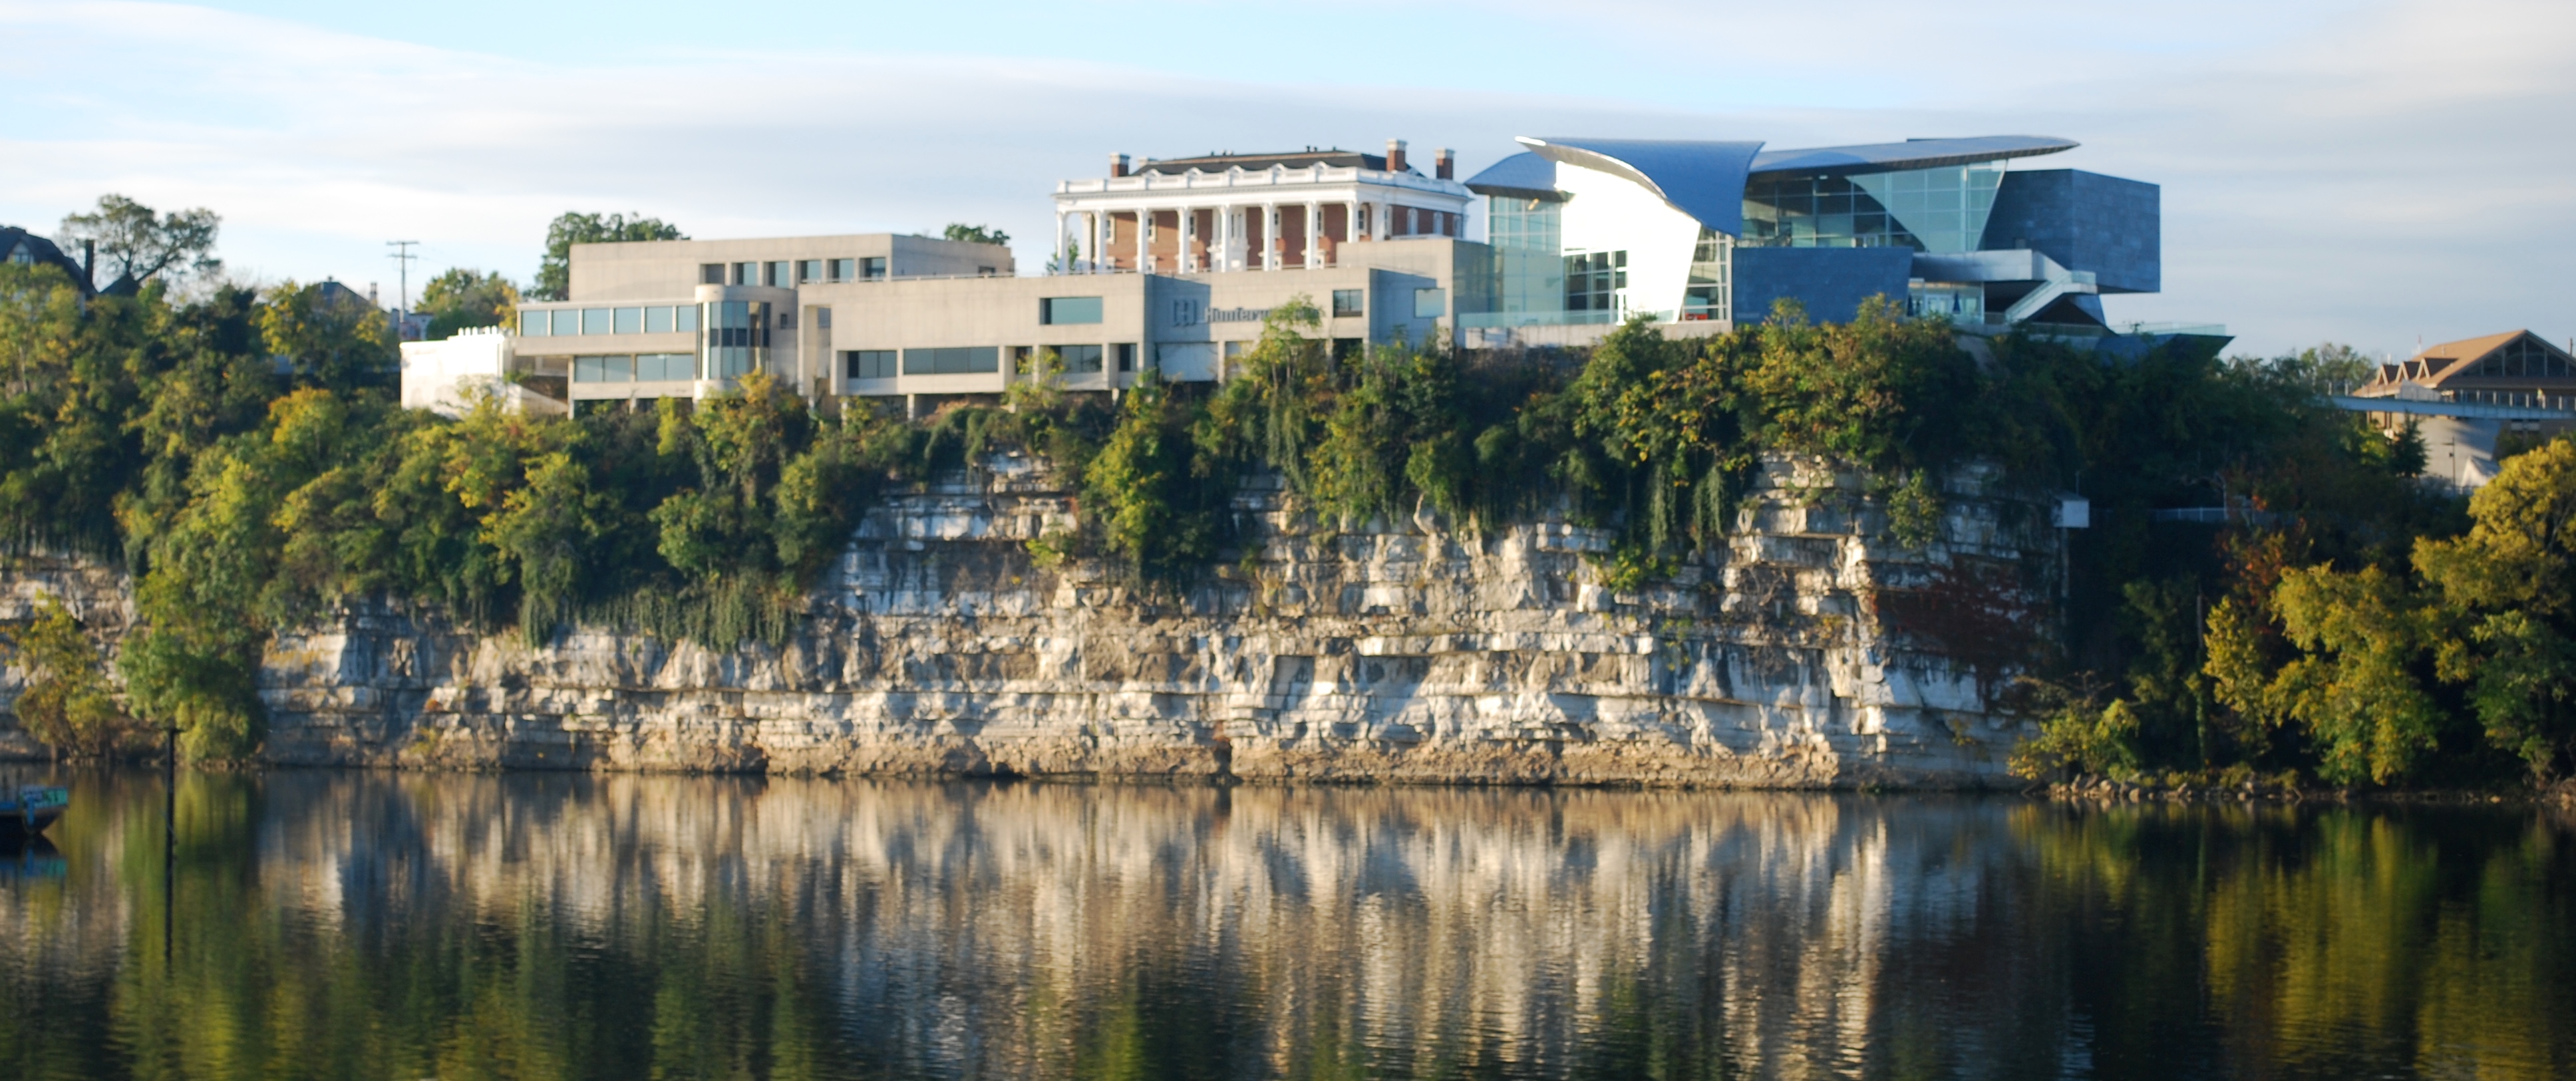 Hunter Museum and Bluff View in Chattanooga